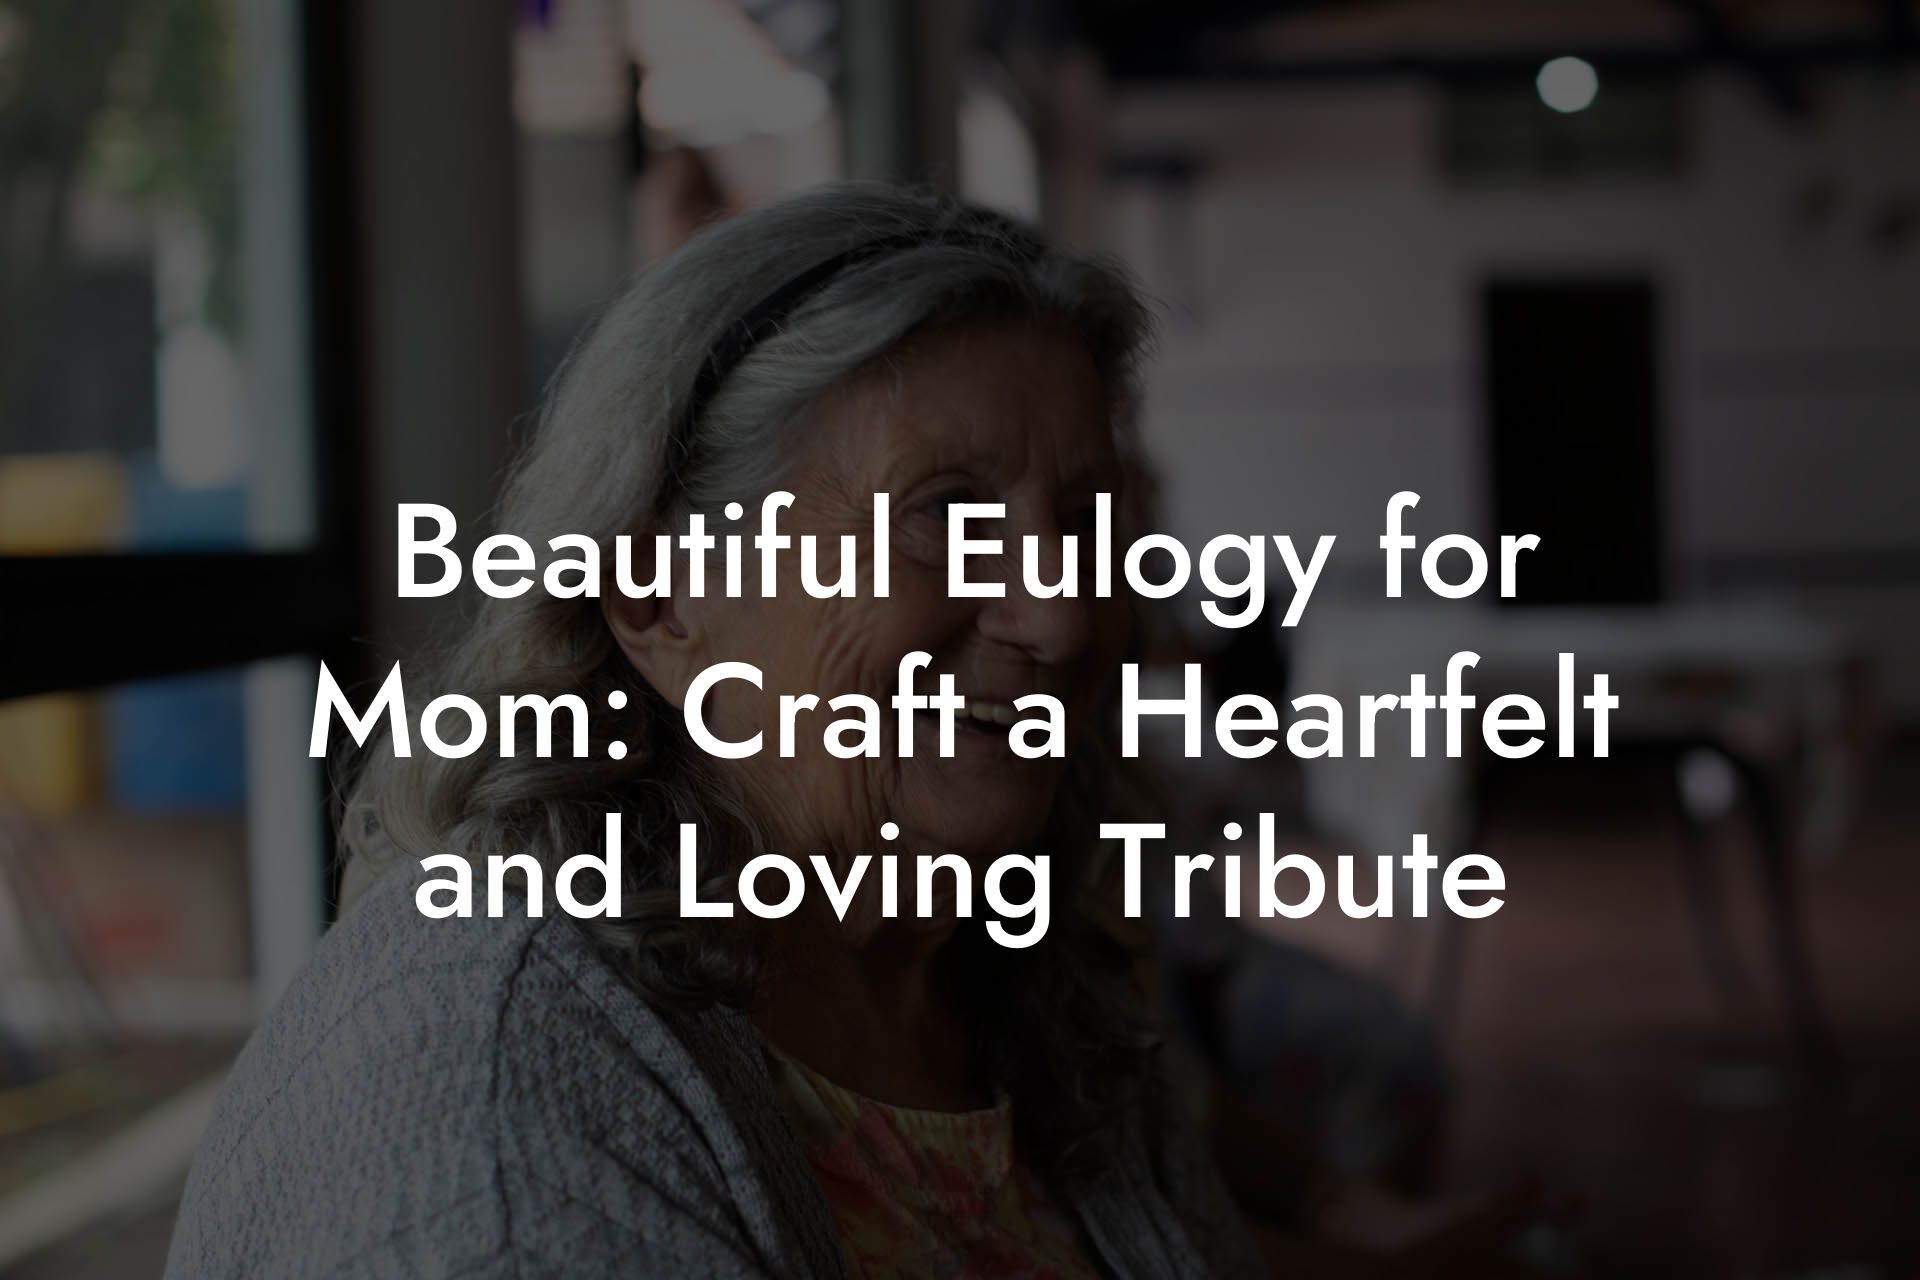 Beautiful Eulogy for Mom: Craft a Heartfelt and Loving Tribute